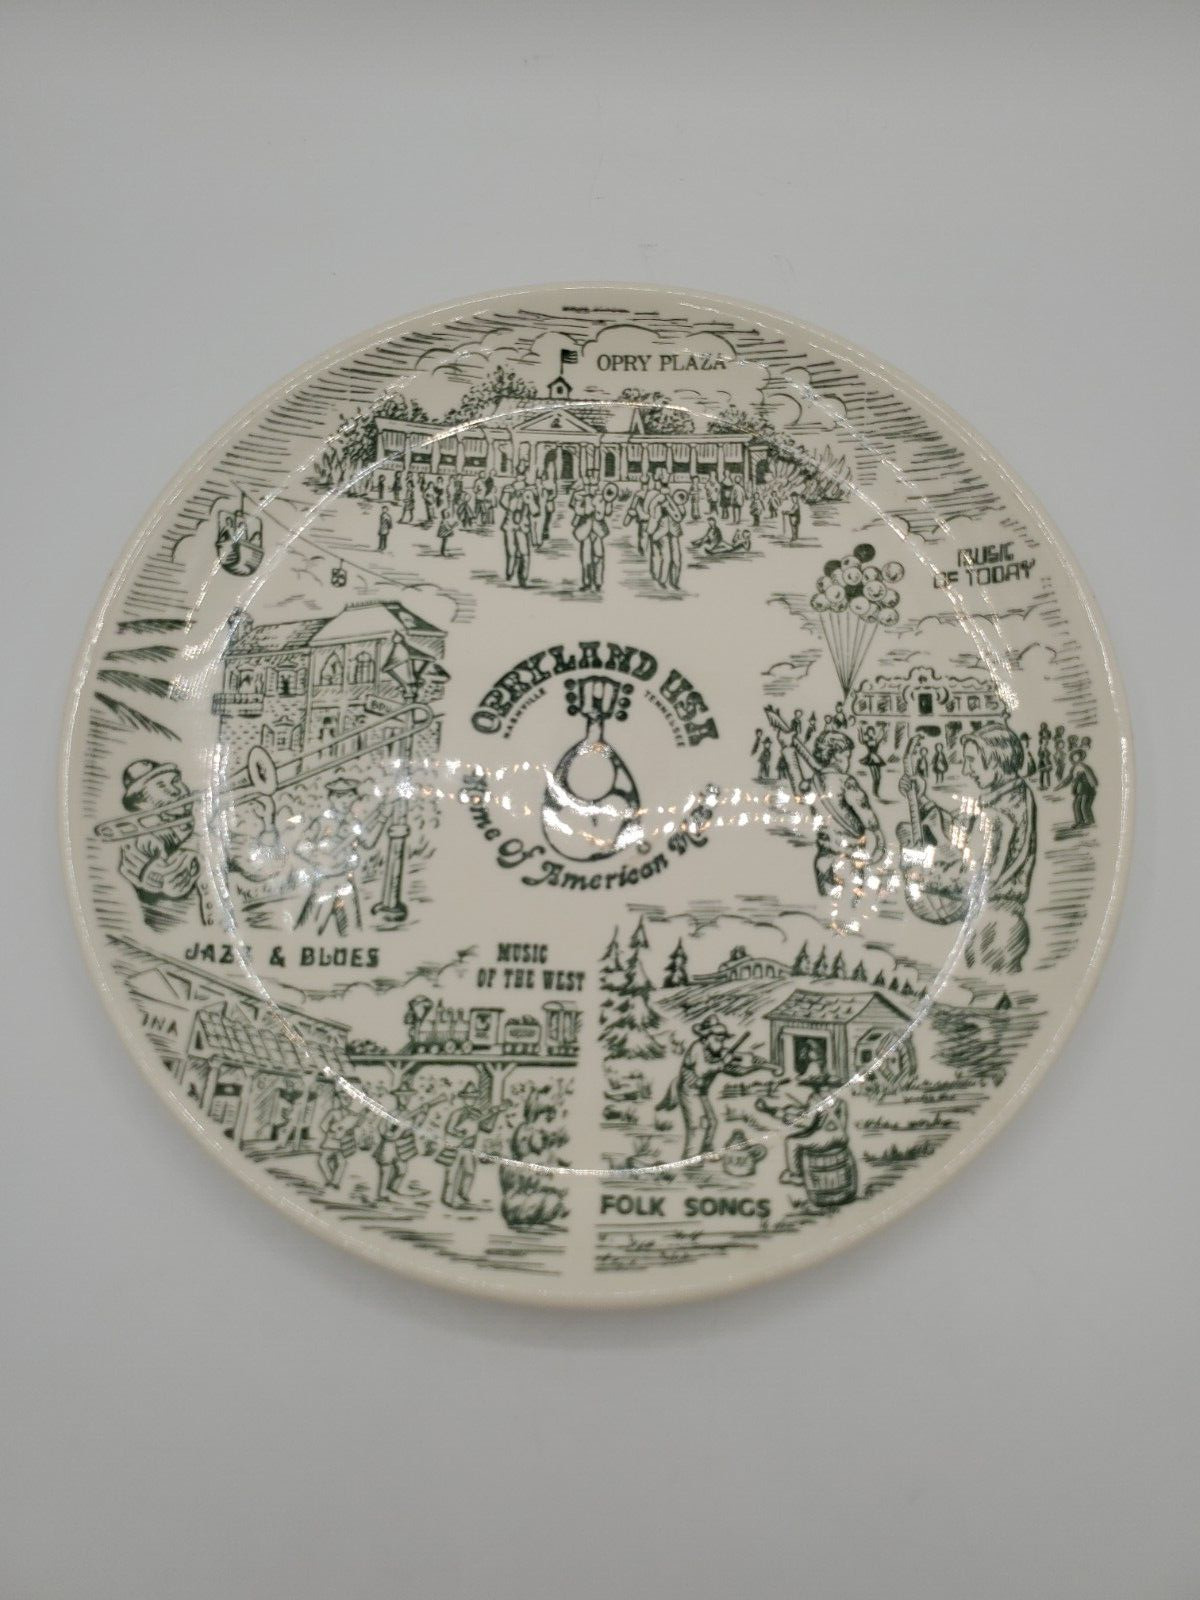 Vintage Opryland USA Nashville Home of American Music Collector Plate 9.75